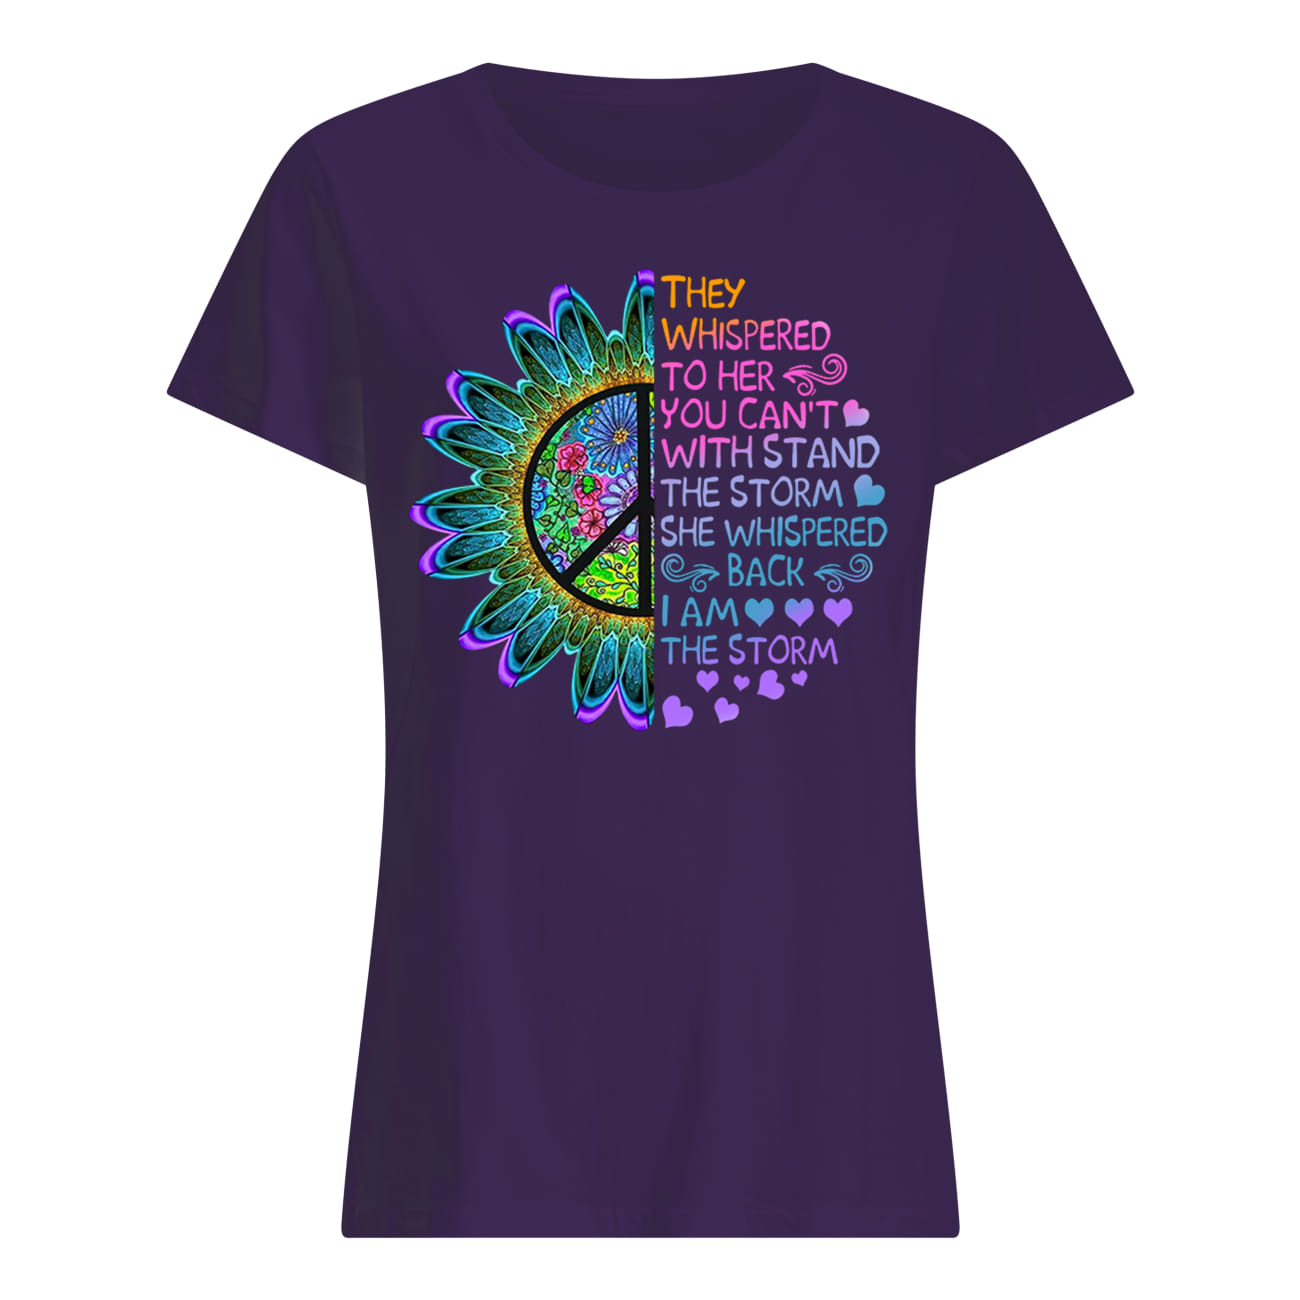 They whispered to her you can't with stand the storm she whispered black I am the storm hippie daizy lady shirt